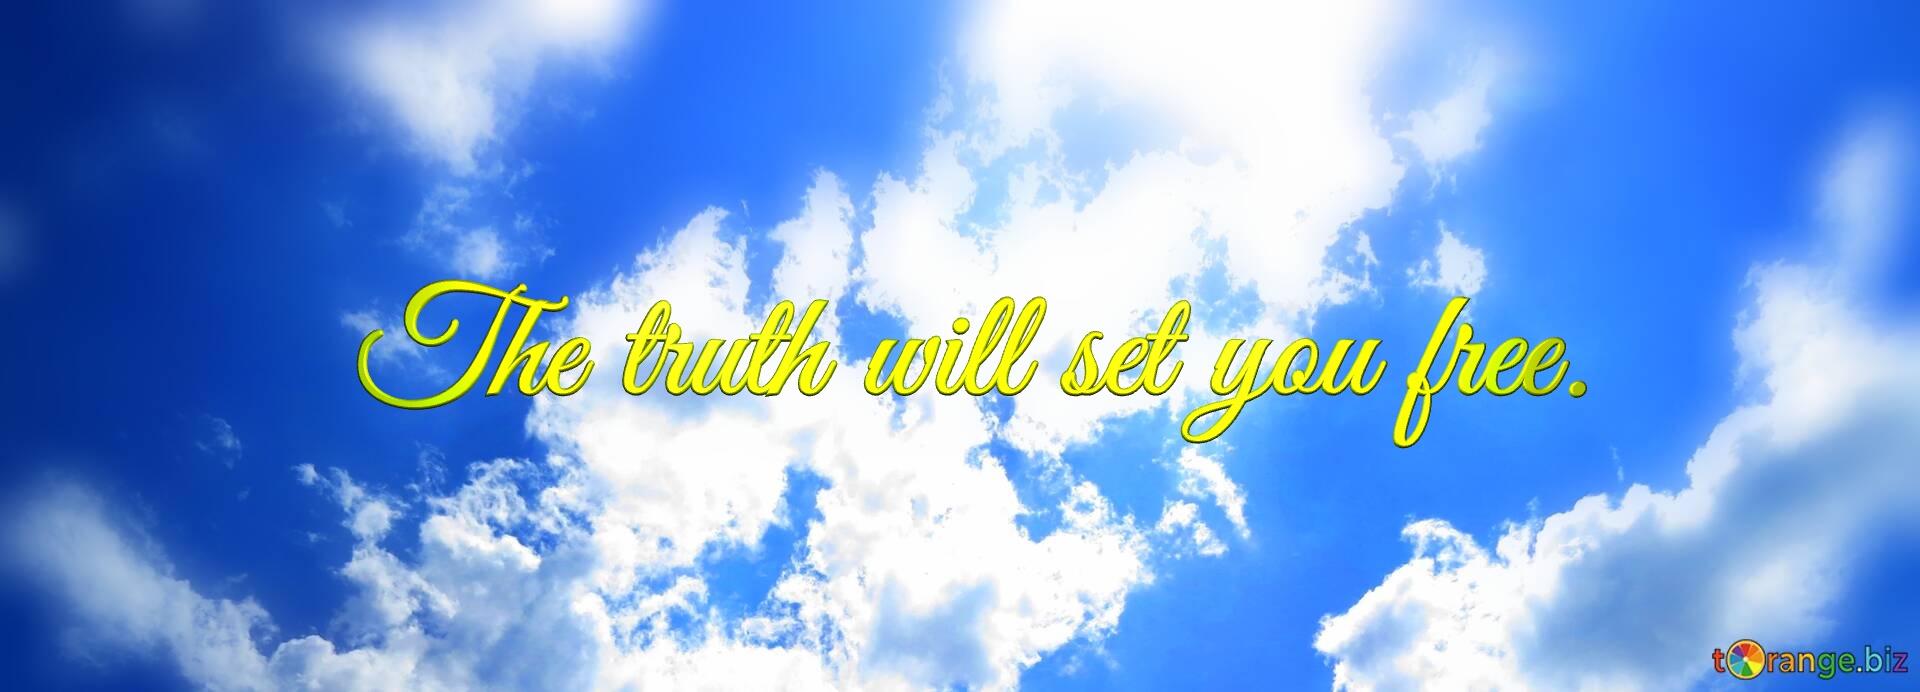 The truth will set you free. Cover for Facebook Sky cover background №0